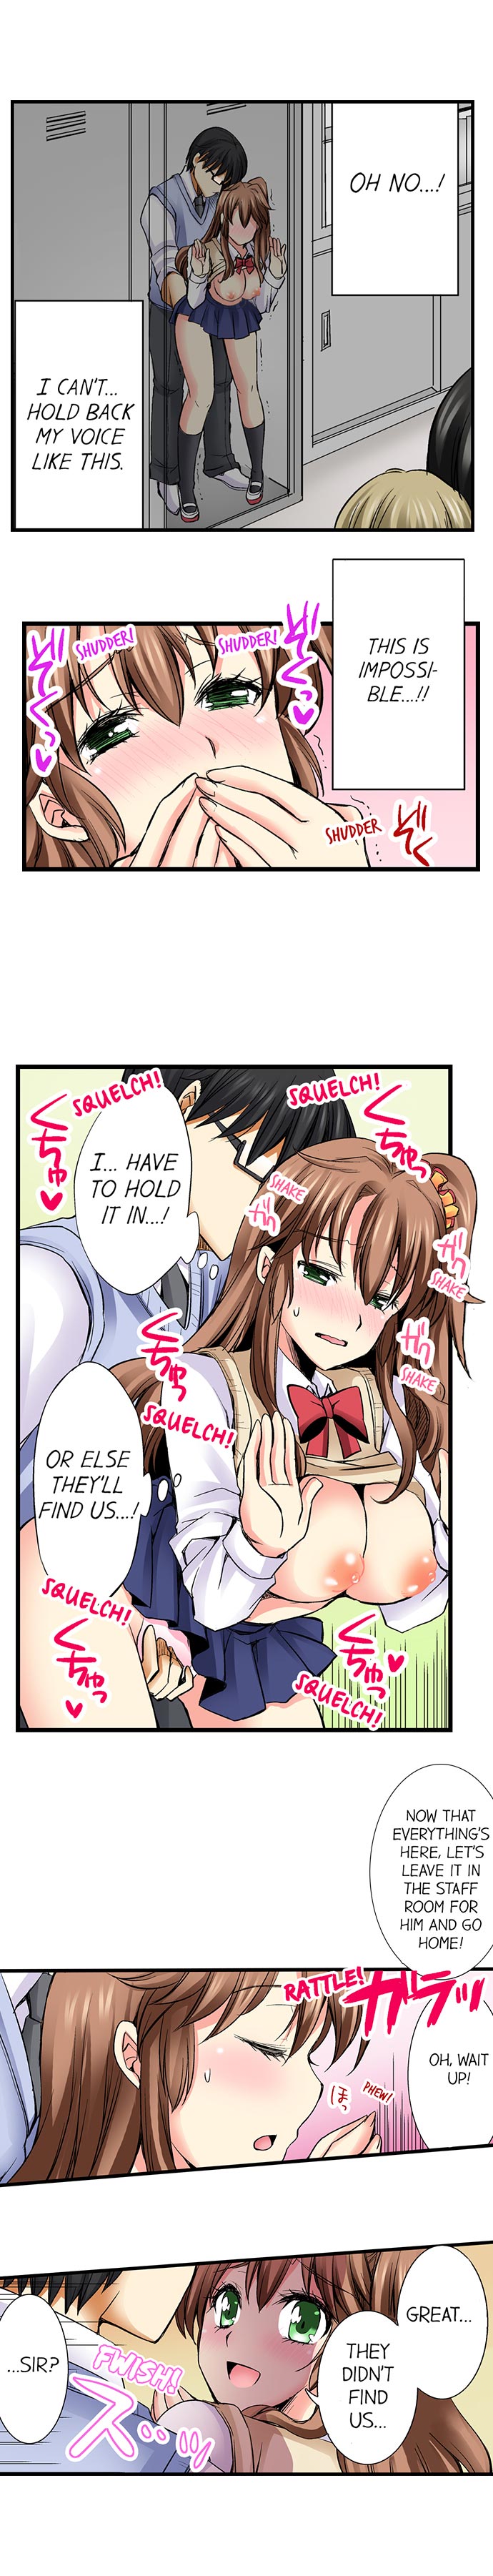 Why Can't i Have Sex With My Teacher? - Chapter 12 Page 3